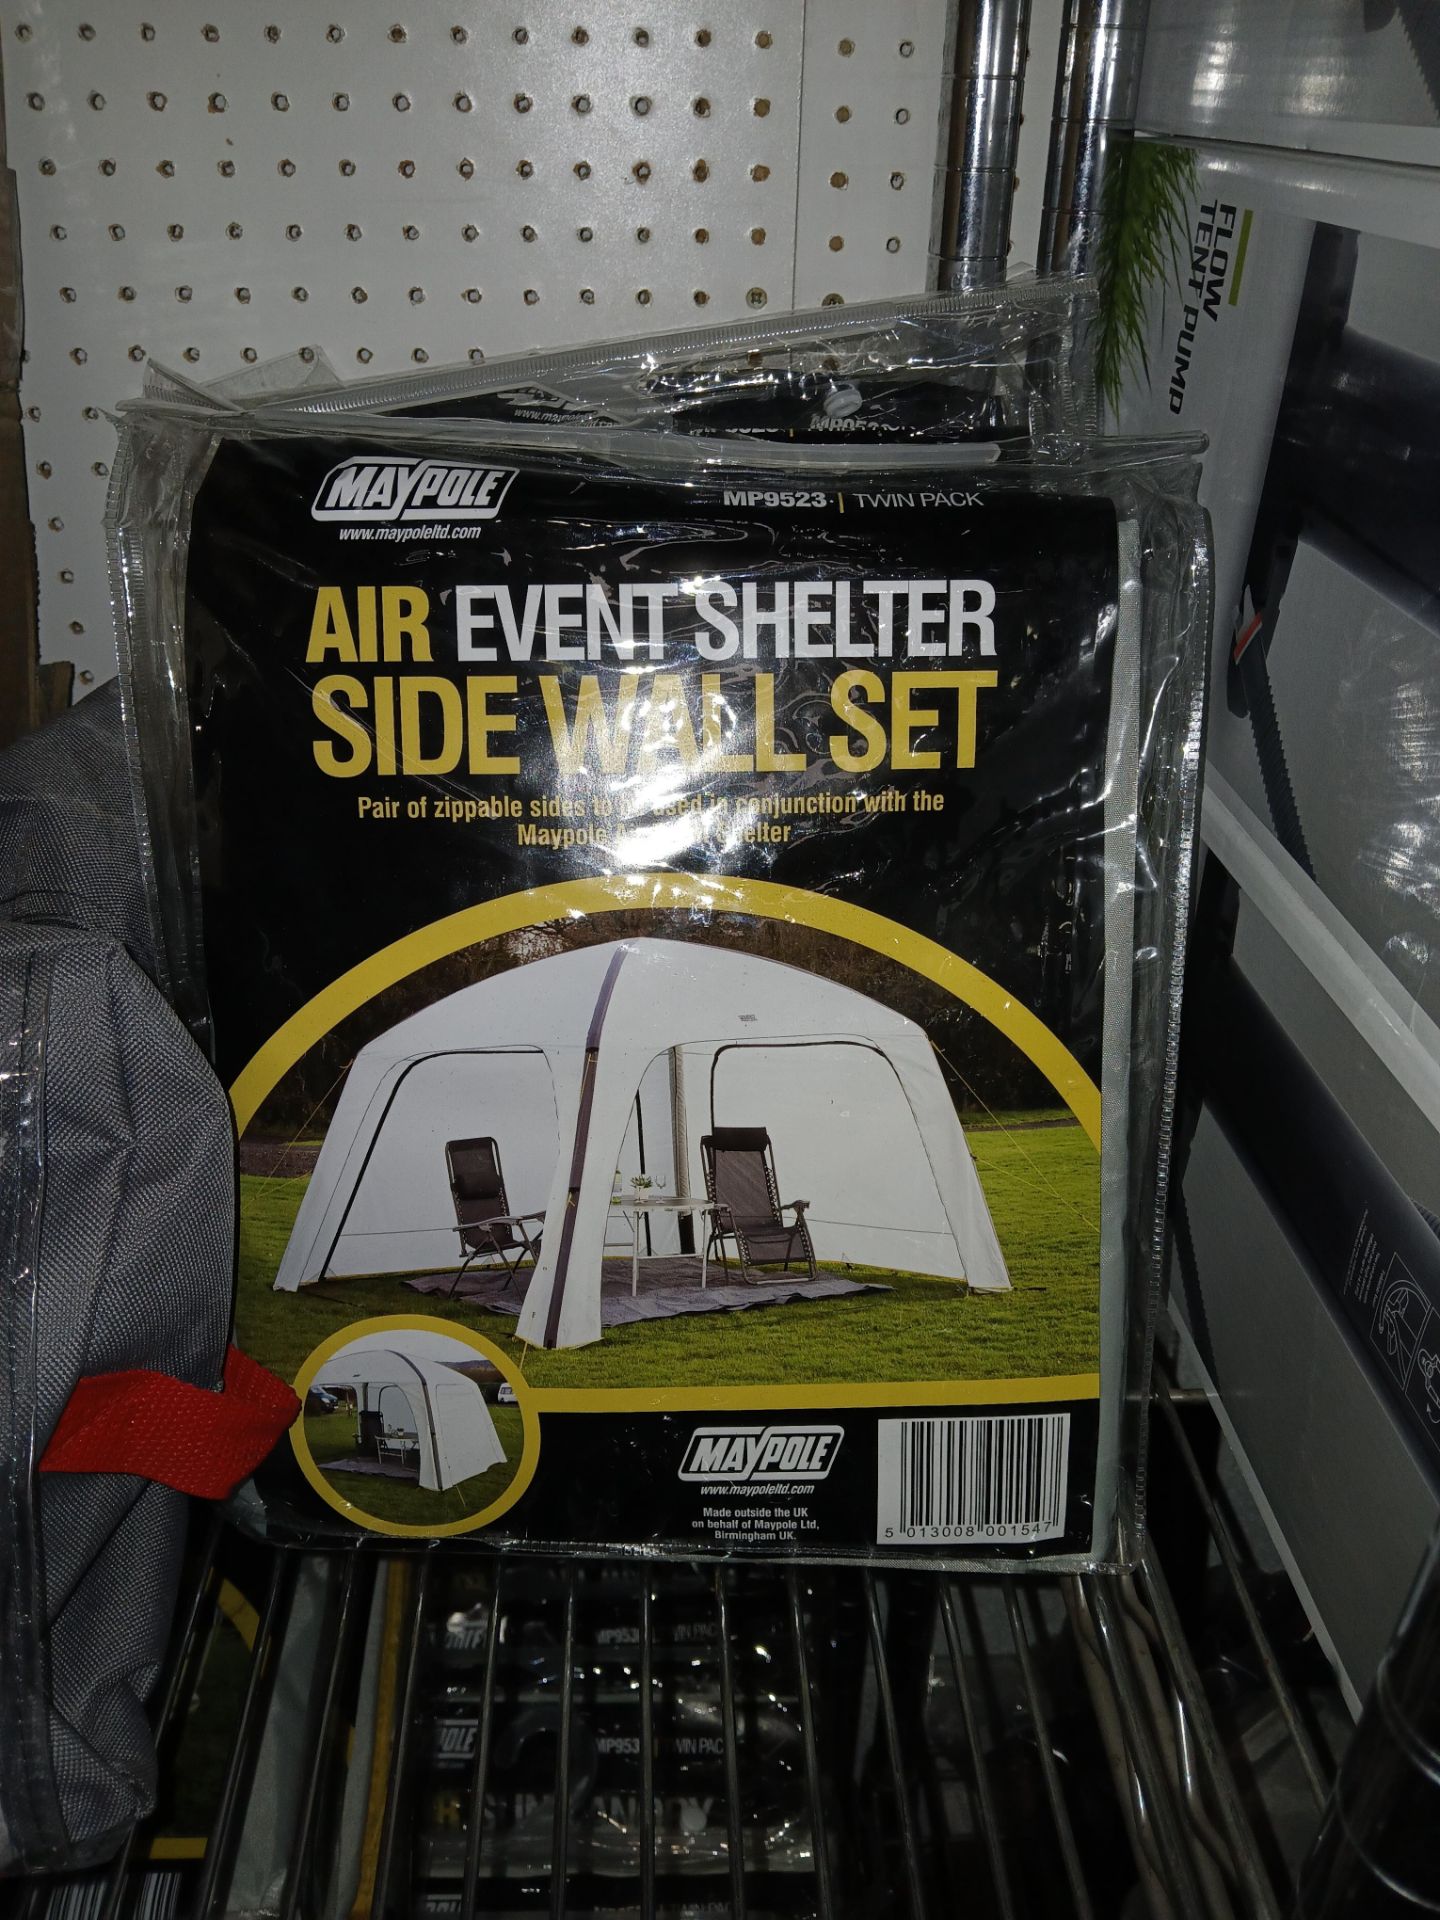 An assortment of Event Shelters to shelf to include Maypole Air Event Shelter Side Wall Set and - Image 2 of 3